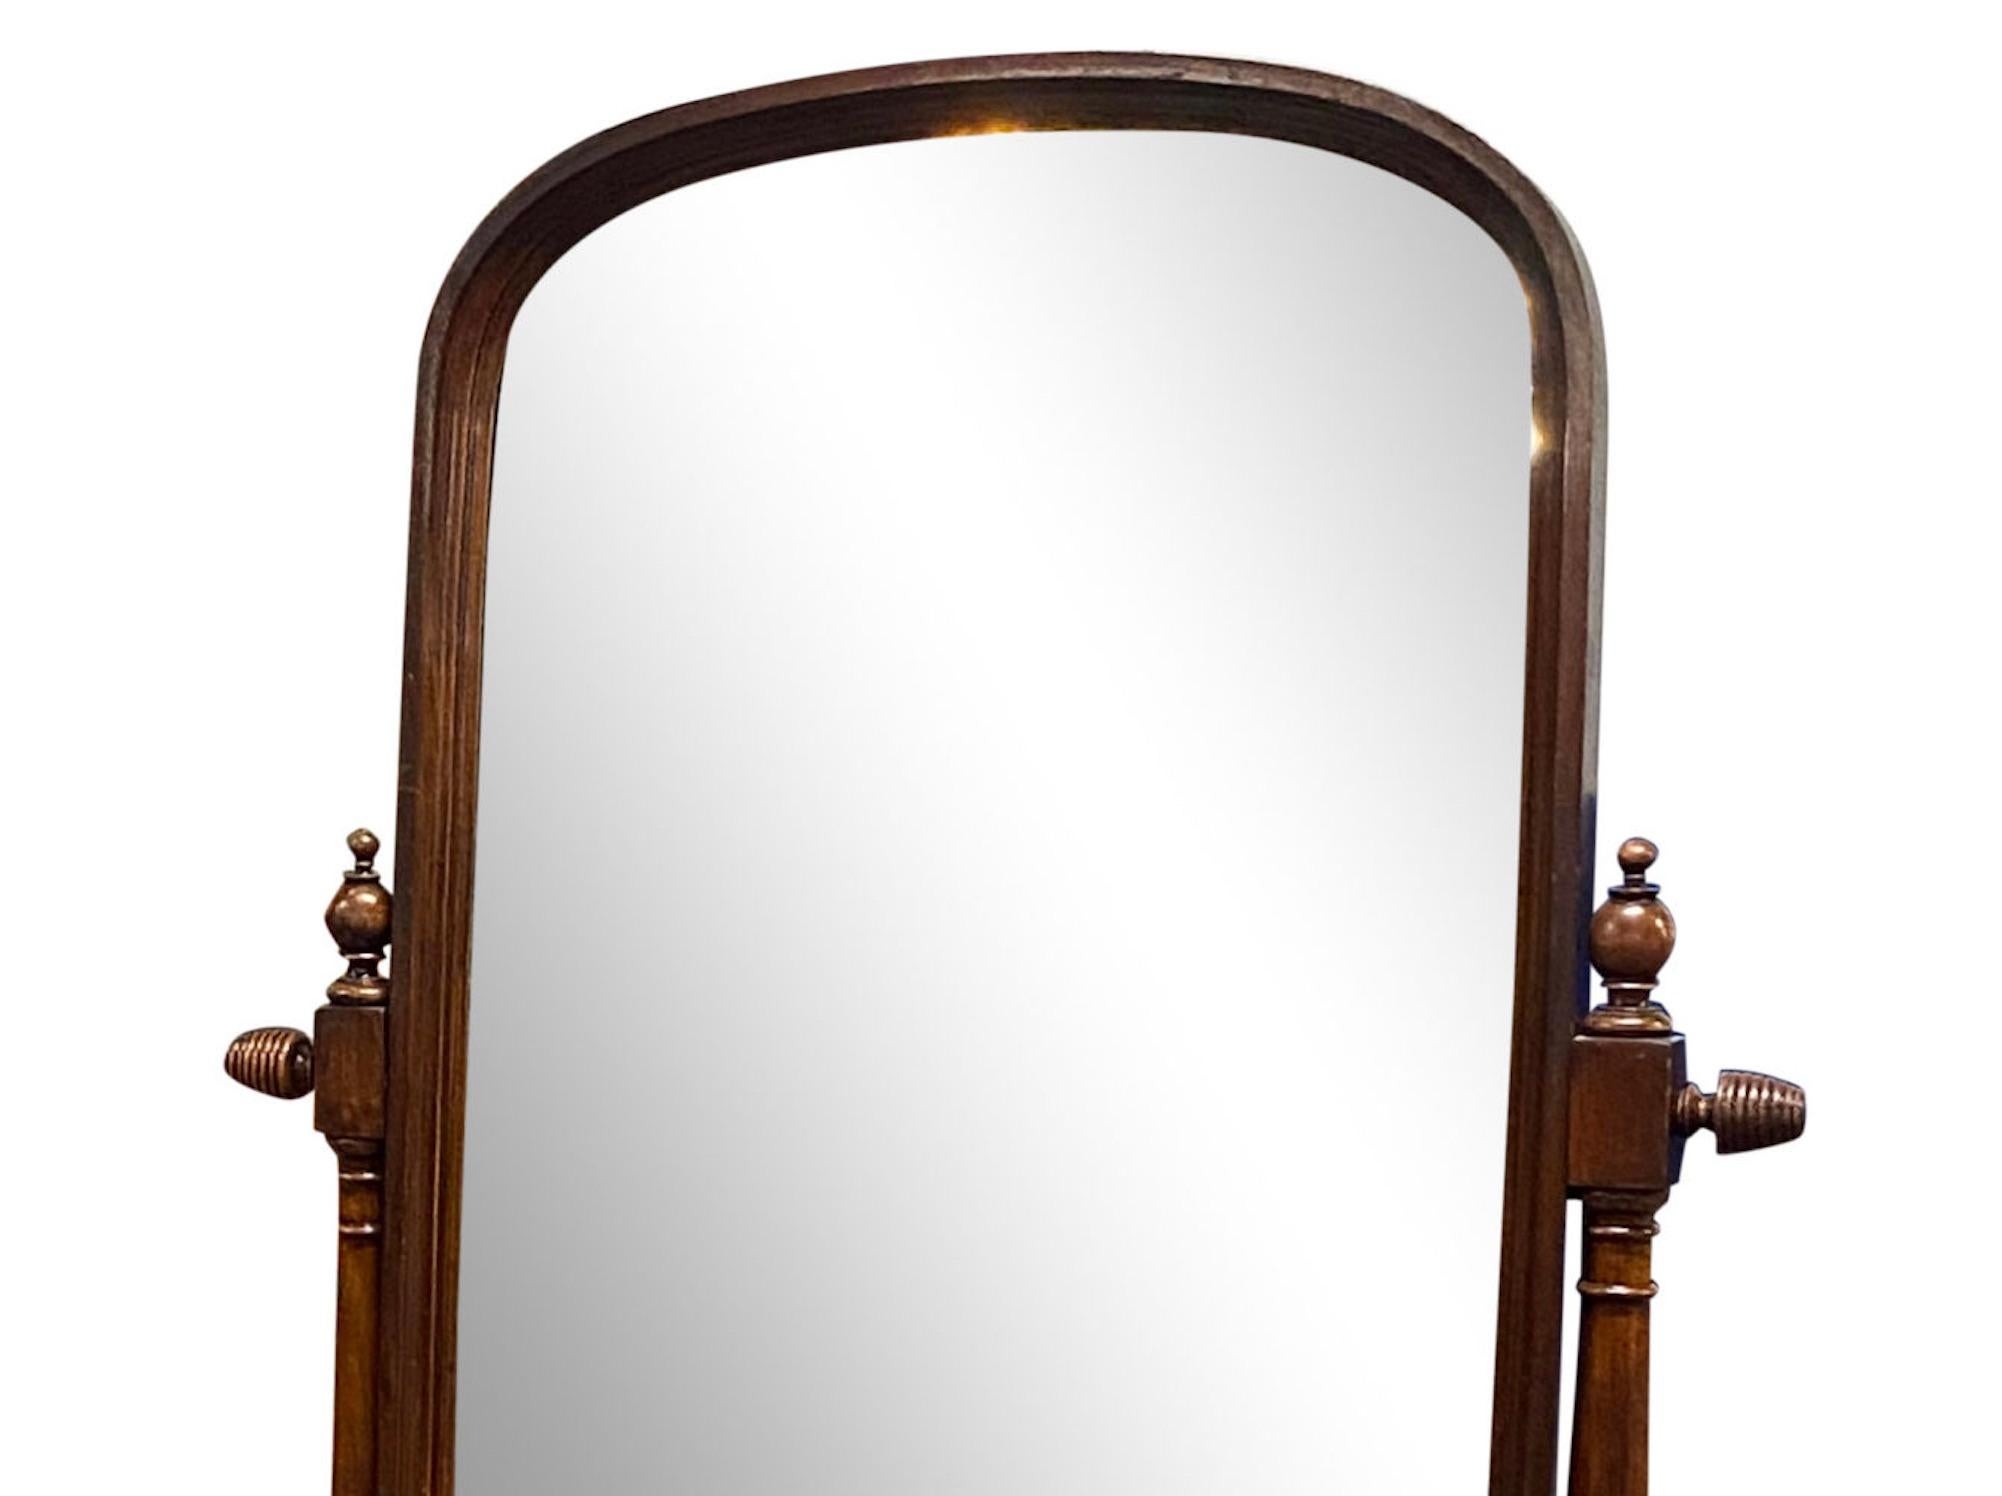 19th Century English Cheval Mirror In Good Condition For Sale In Sag Harbor, NY